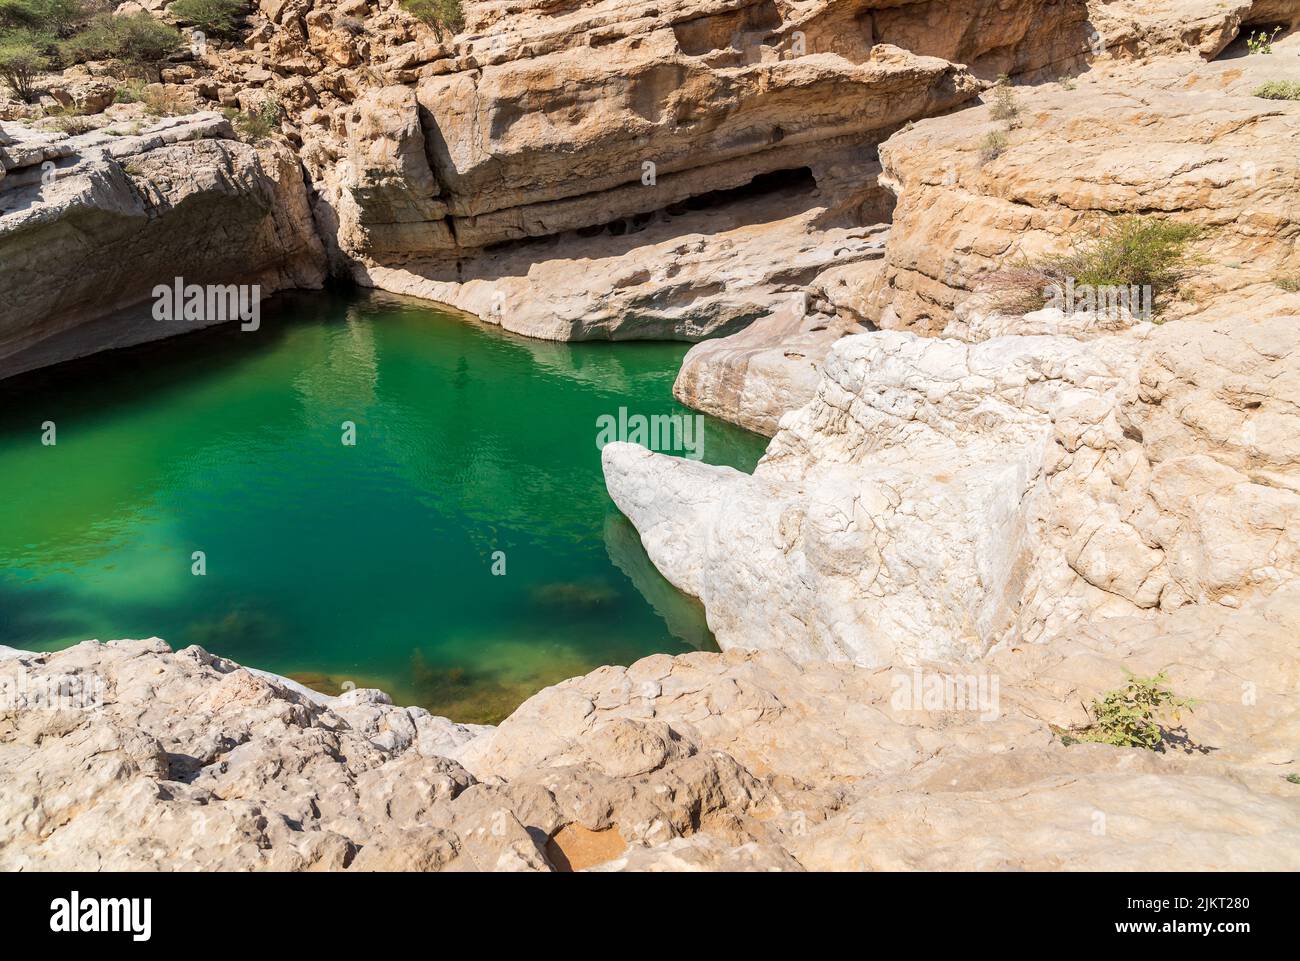 View of the Wadi Bani Khalid oasis in the desert in Sultanate of Oman. Stock Photo